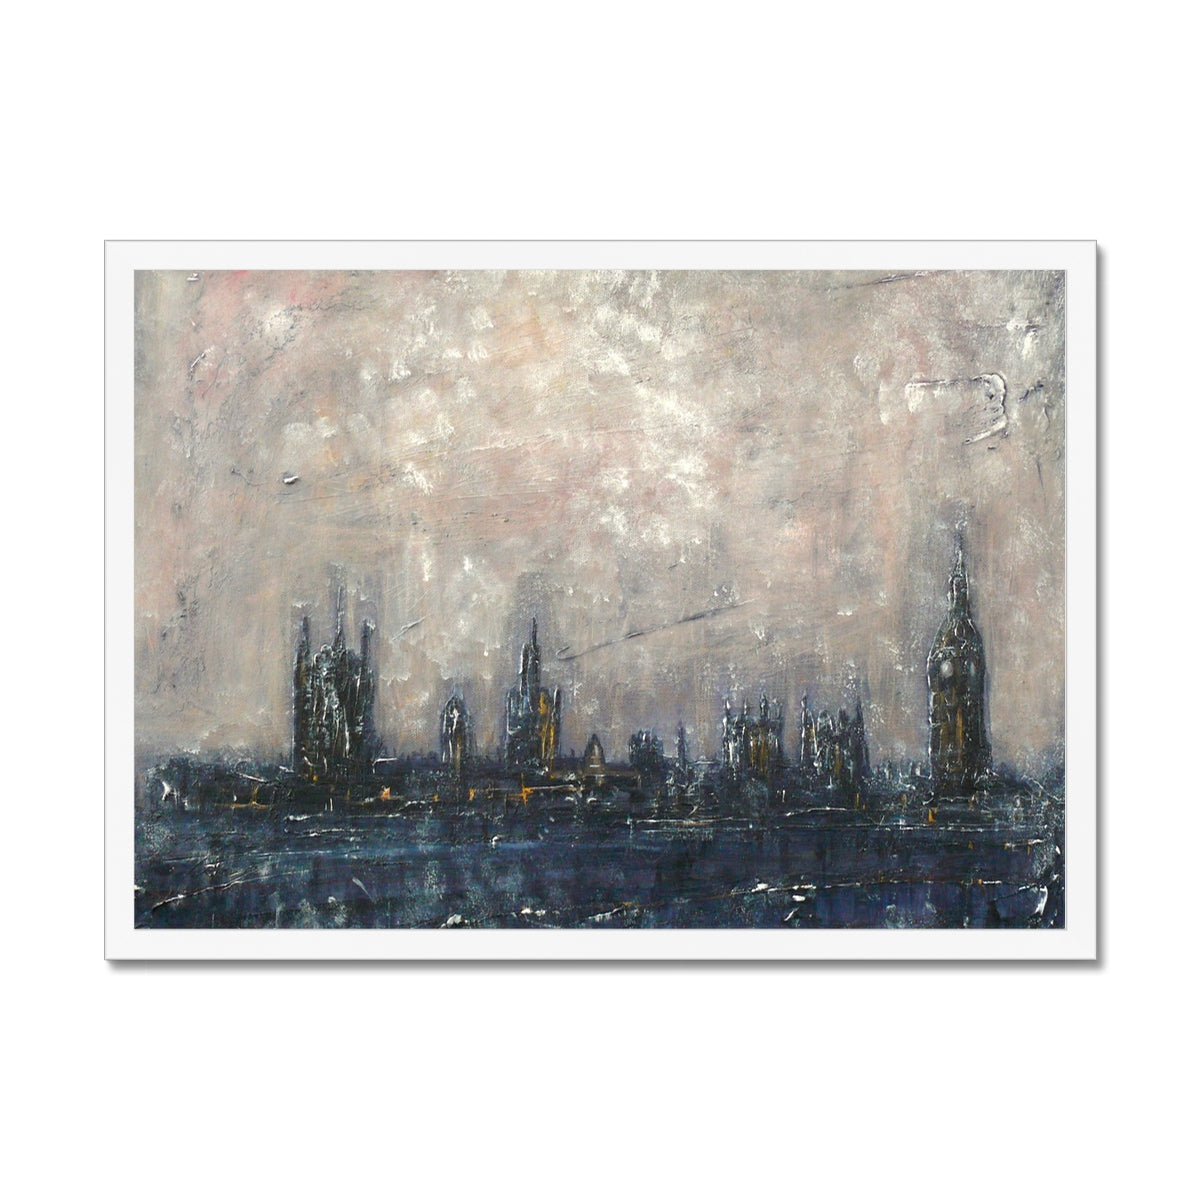 Winter In London Painting | Framed Prints From Scotland-Framed Prints-World Art Gallery-A2 Landscape-White Frame-Paintings, Prints, Homeware, Art Gifts From Scotland By Scottish Artist Kevin Hunter